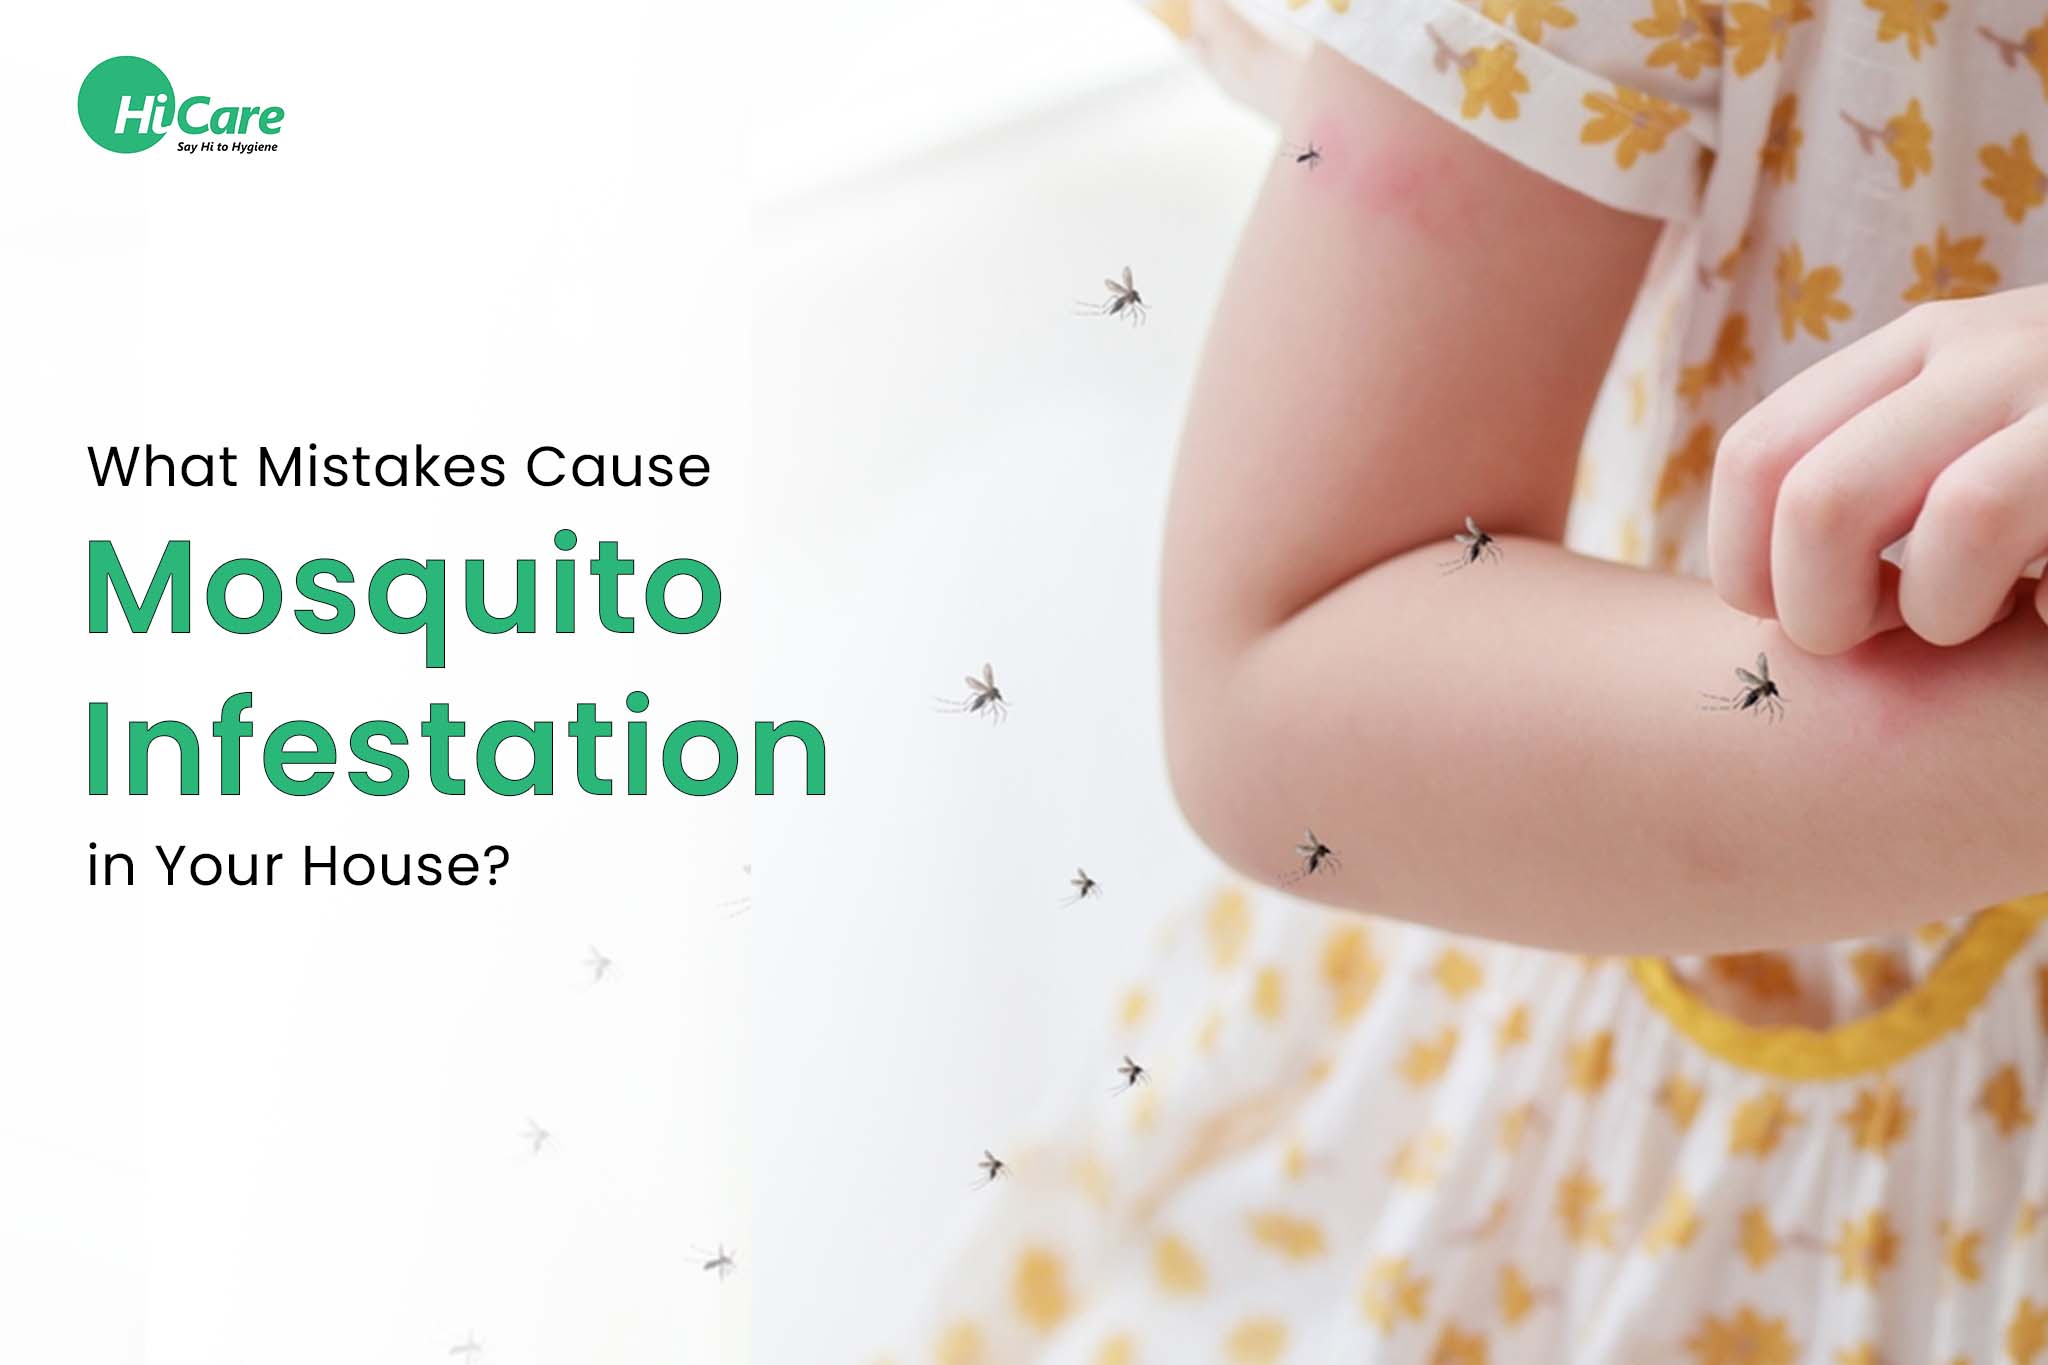 What Mistakes Cause Mosquito Infestation in Your House?